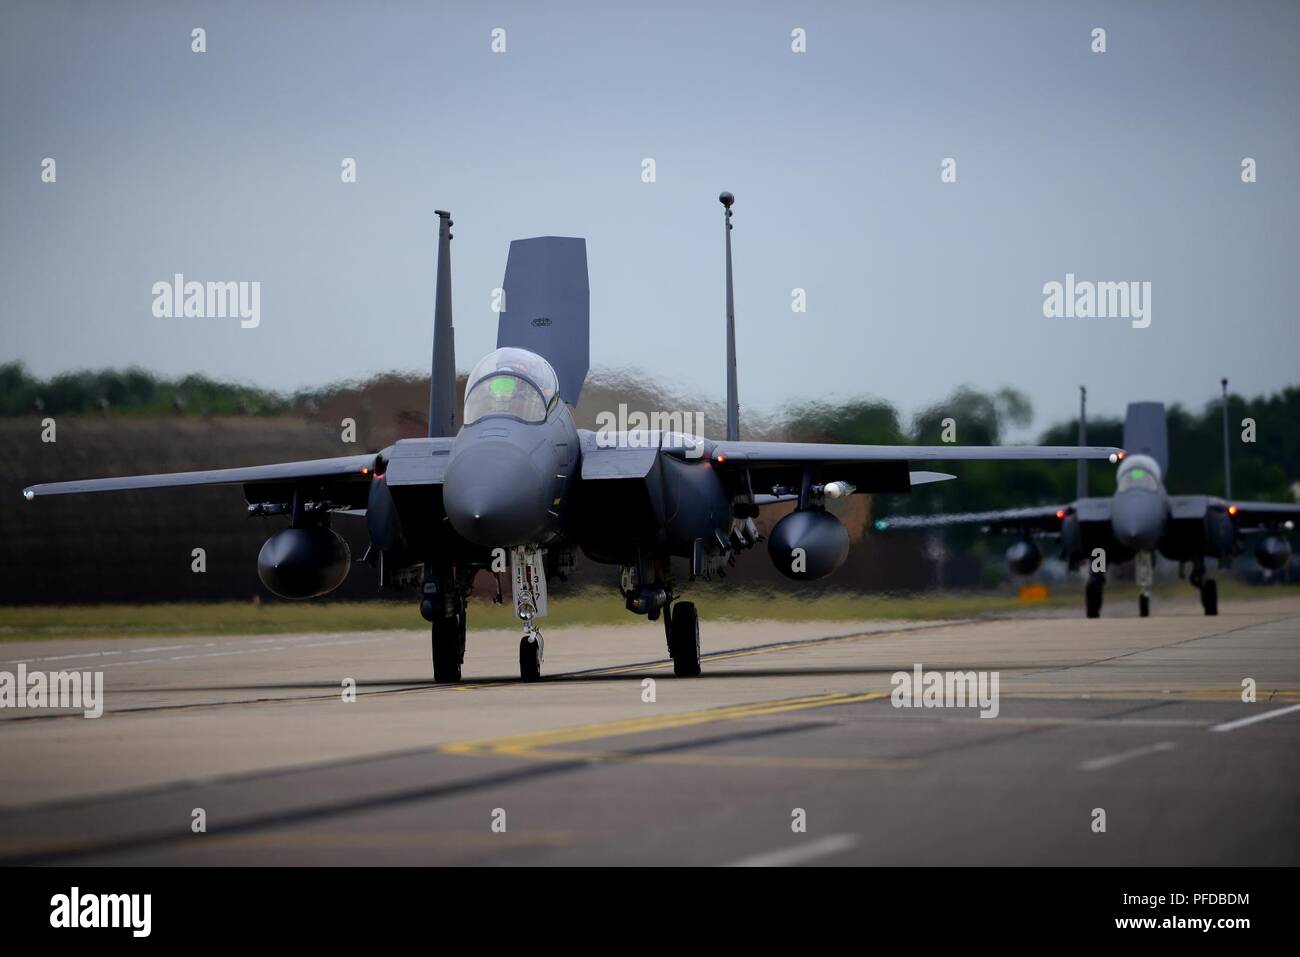 F-15E Strike Eagles assigned to the 492nd Fighter Squadron taxi for the runway during a readiness exercise at Royal Air Force Lakenheath, England, June 5, 2018. Exercise scenarios are designed to emphasize the importance of combat skills effectiveness training and ensure Liberty Wing Airmen are fully prepared for potential contingencies. Stock Photo